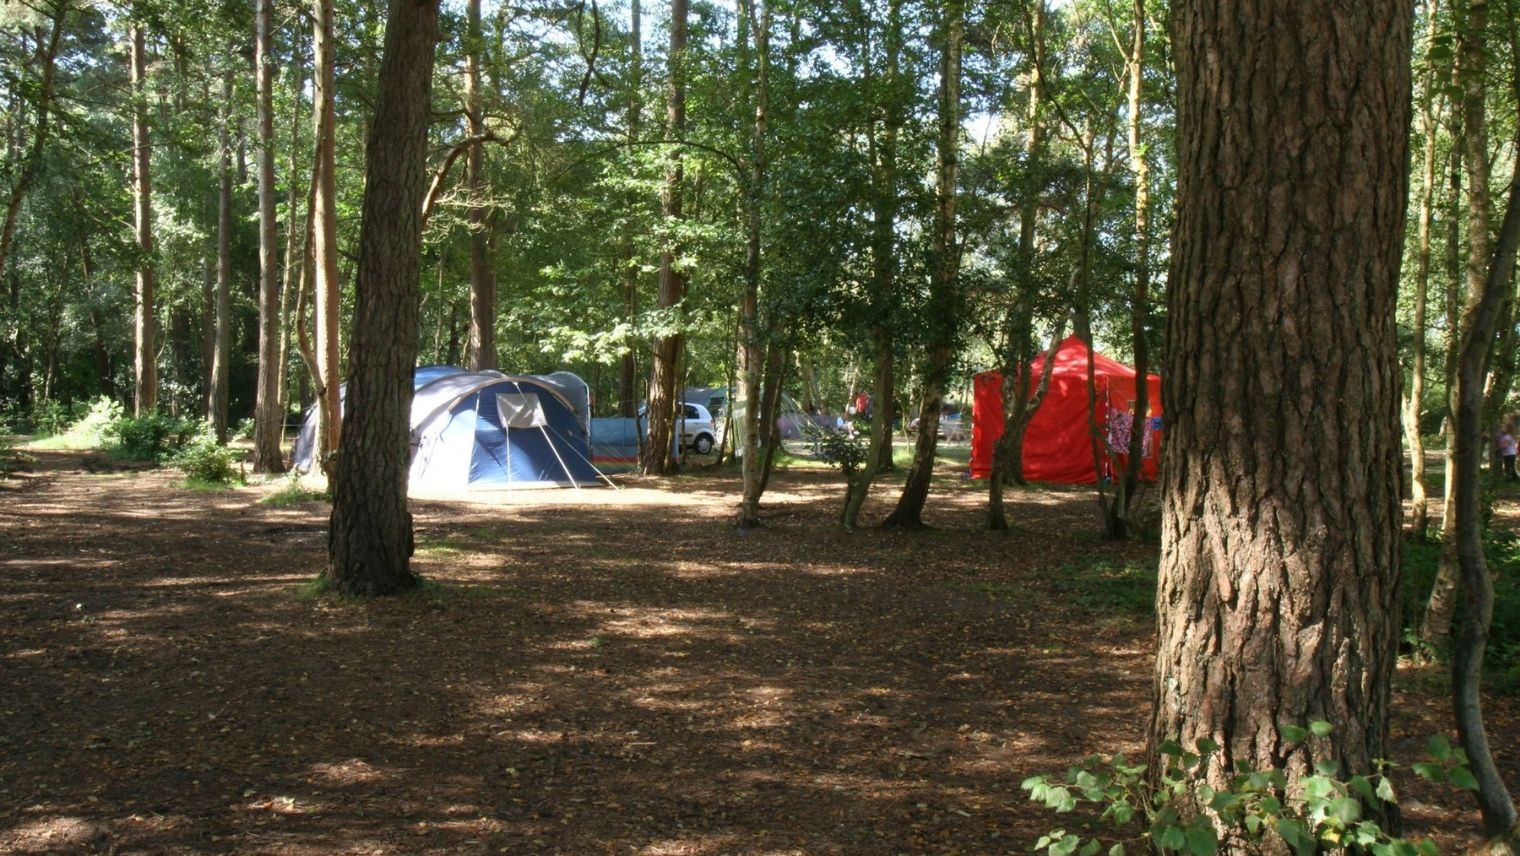 Tents in the forest at Burnbake Campsite